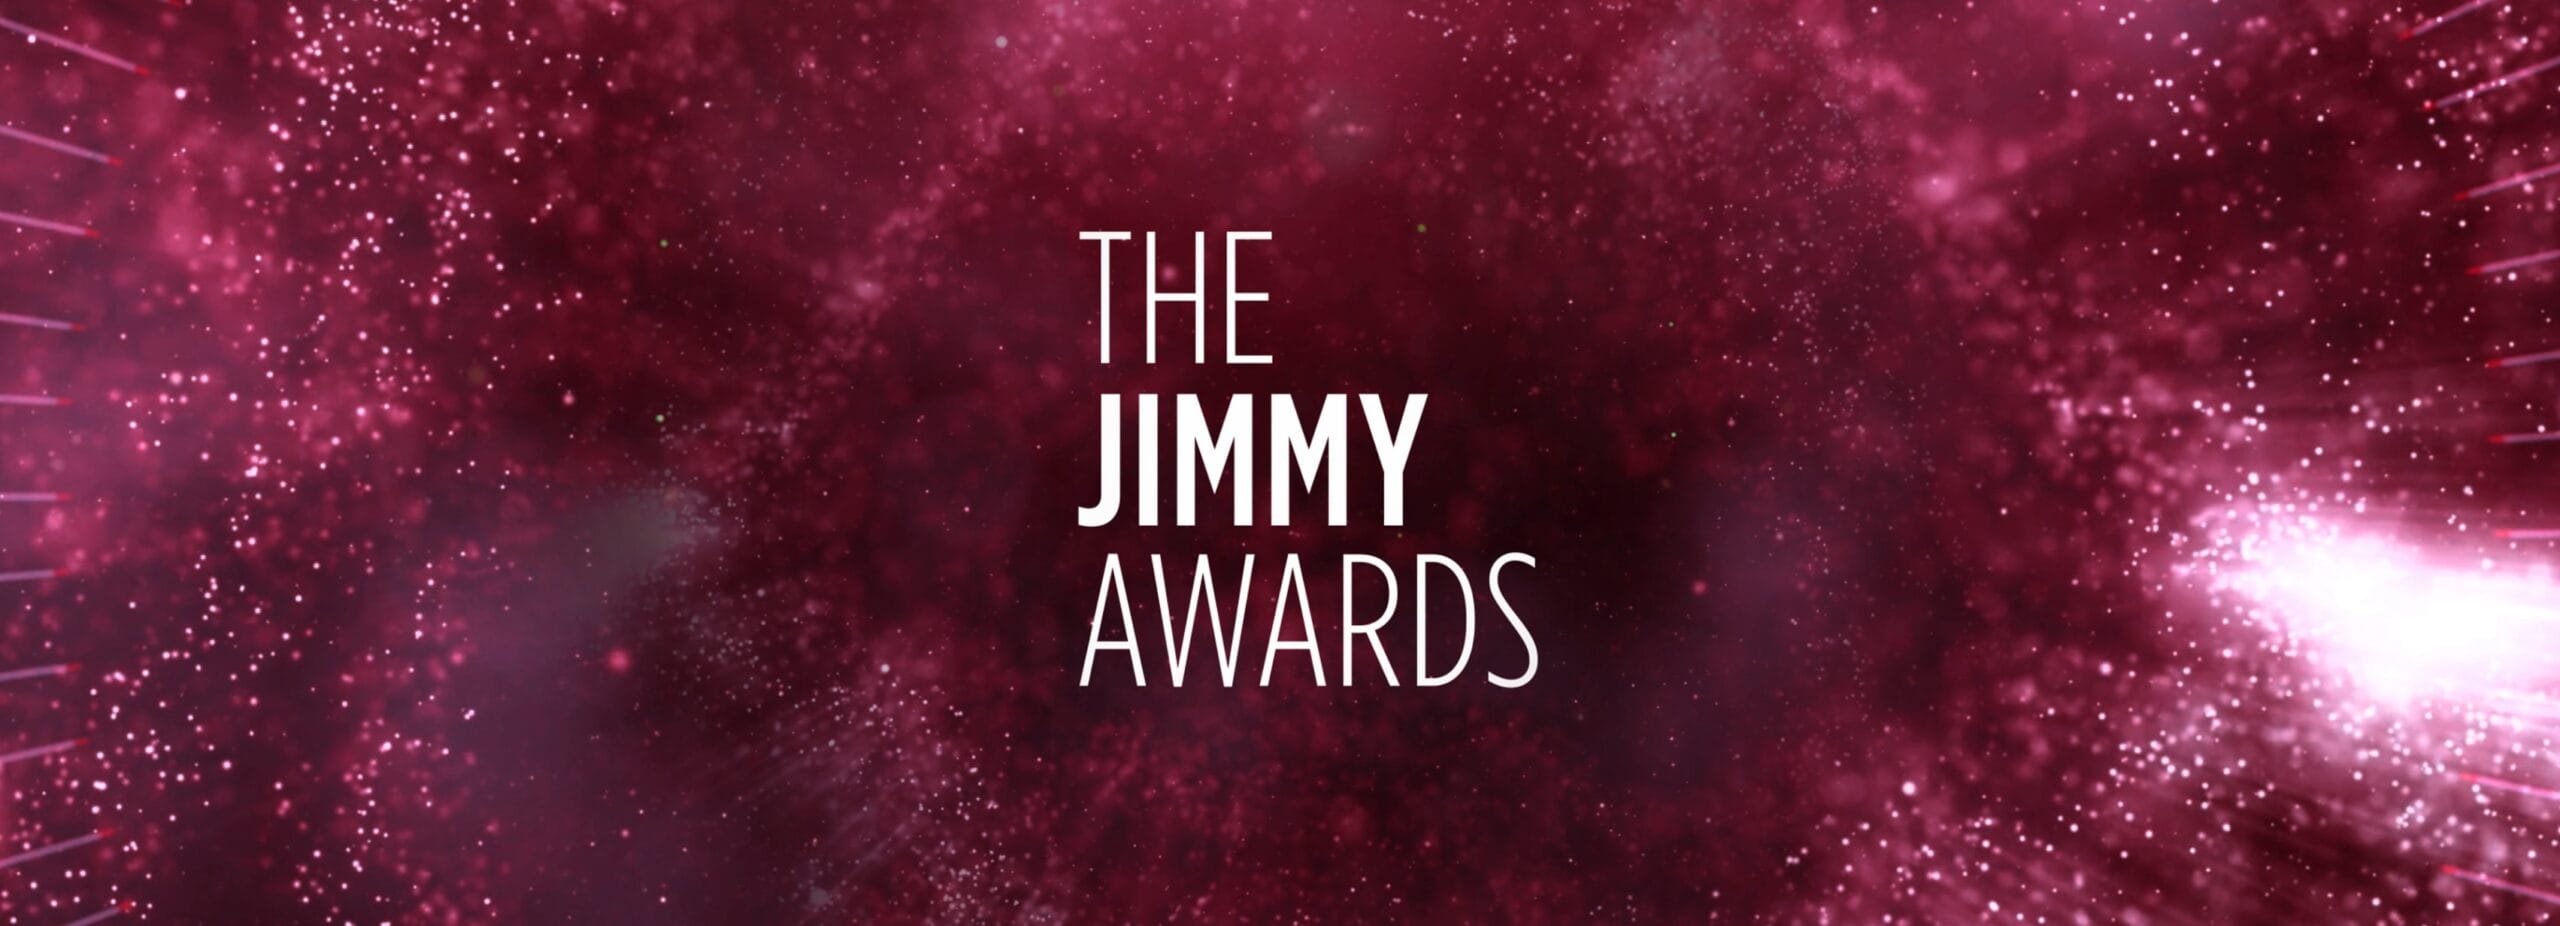 The 14th Annual Jimmy Awards, featuring the next generation of theater